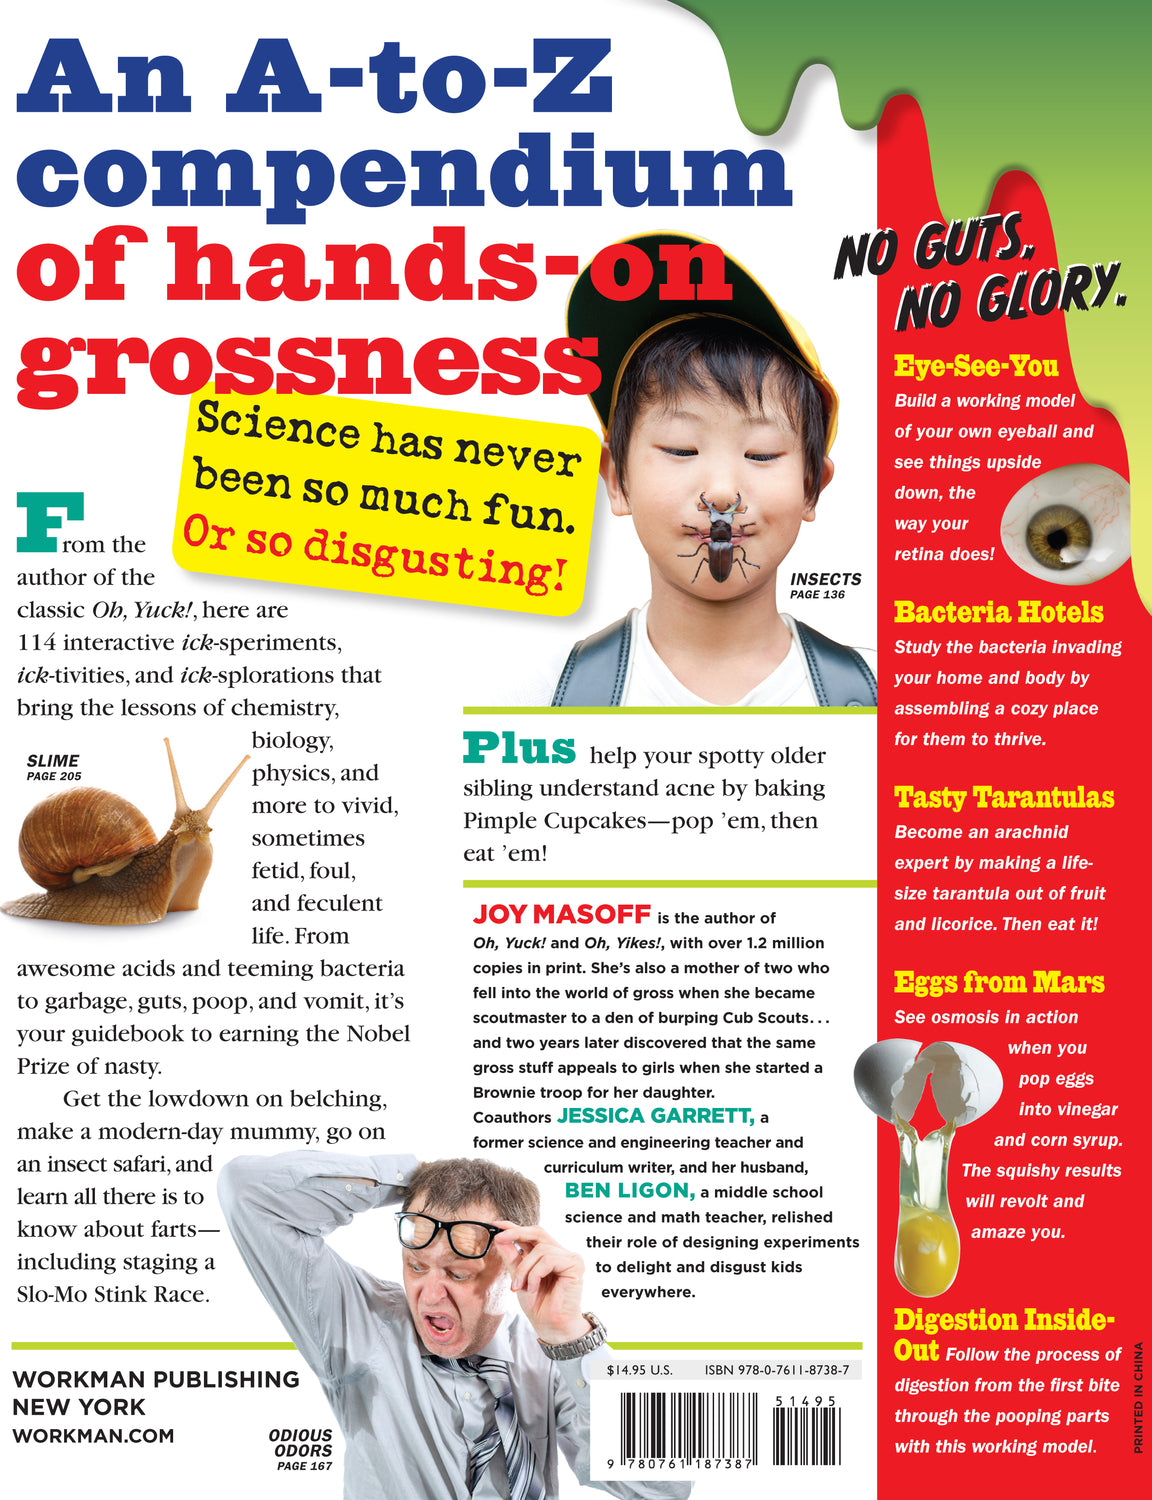 Oh, Ick!: 114 Science Experiments Guaranteed to Gross You Out!